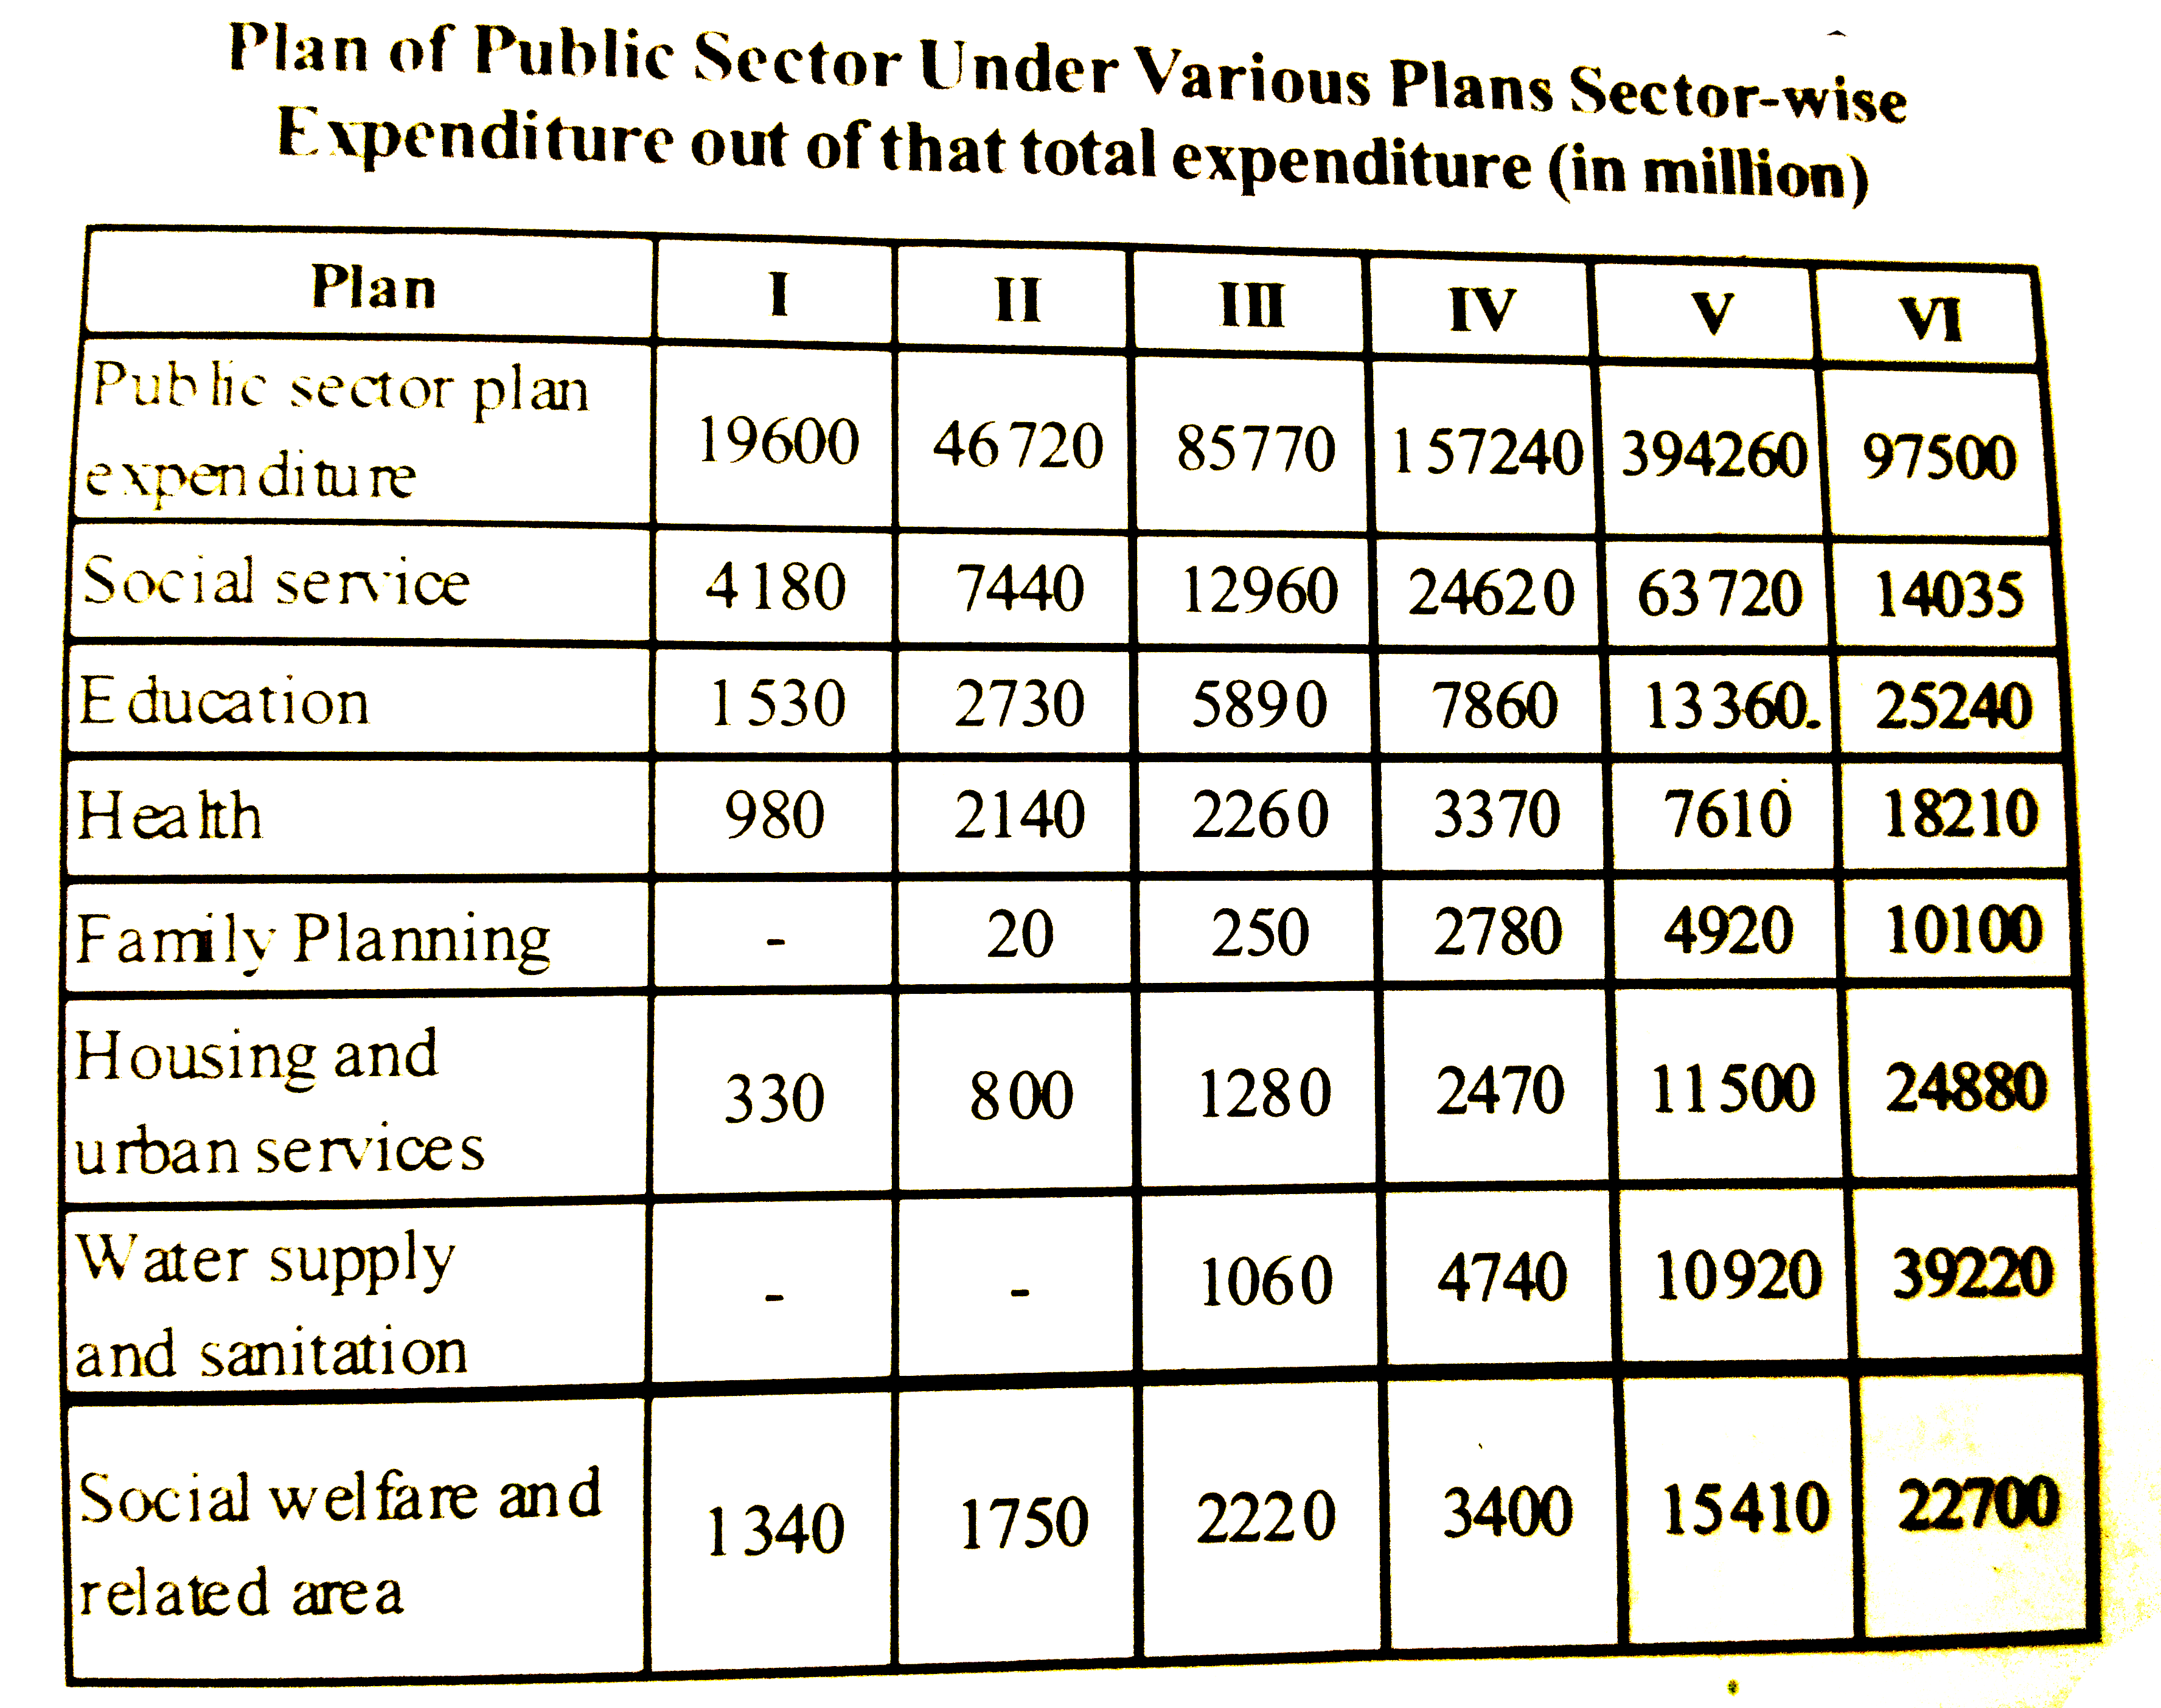 For plan VI out of public sector expenditure, what per cent of expediture is on Housing and Urban services ?